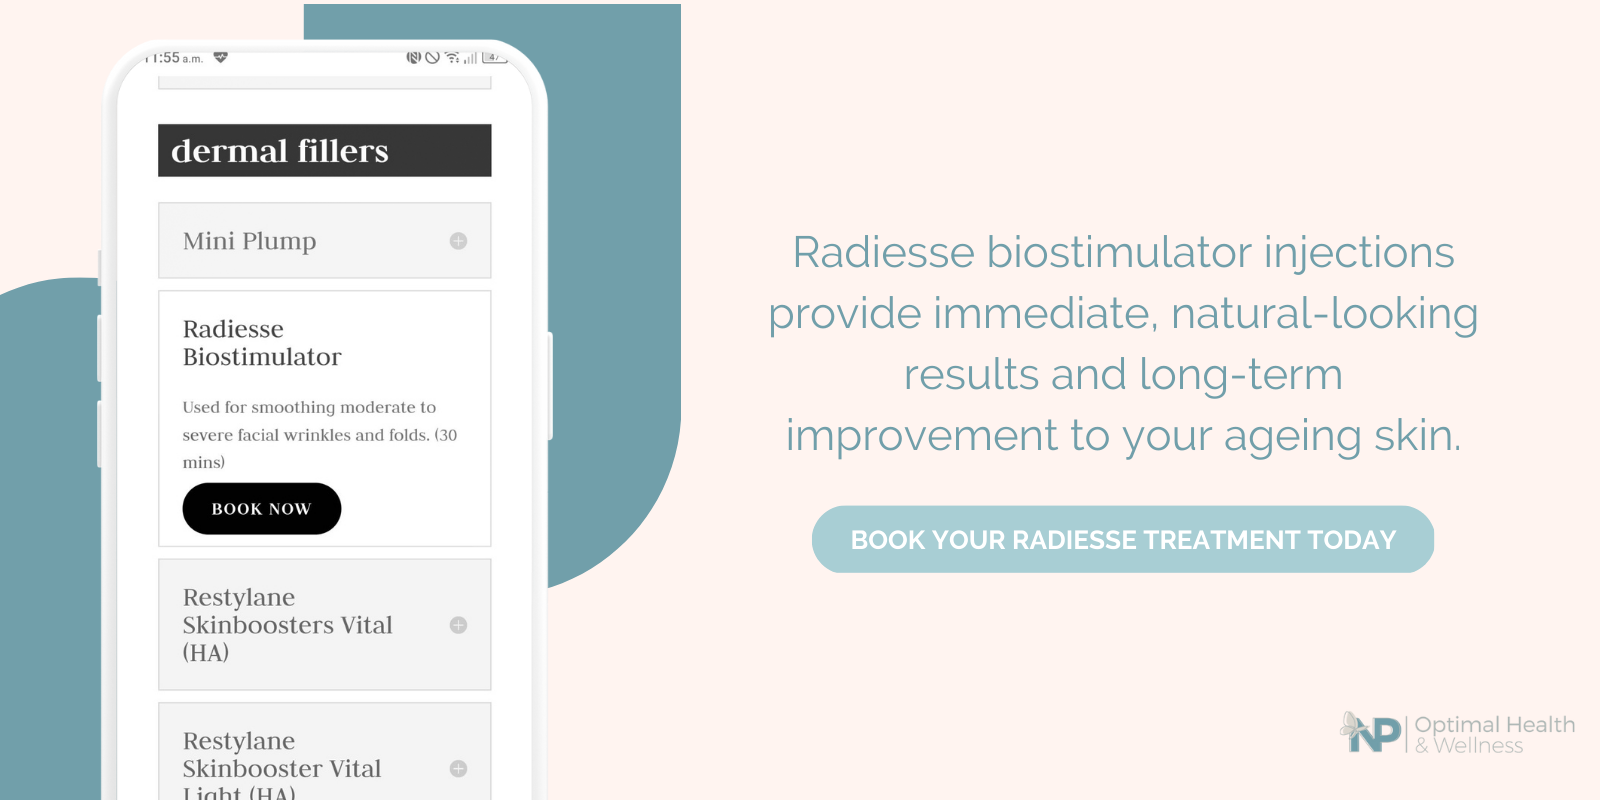 A graphic with a light pink background and blue arch shaes. A cell phone showing the booking app for a skin care treatment is on the left. On the right a block of text reads Radiesse biostimulator injections offer immediate, natural-looking results. 